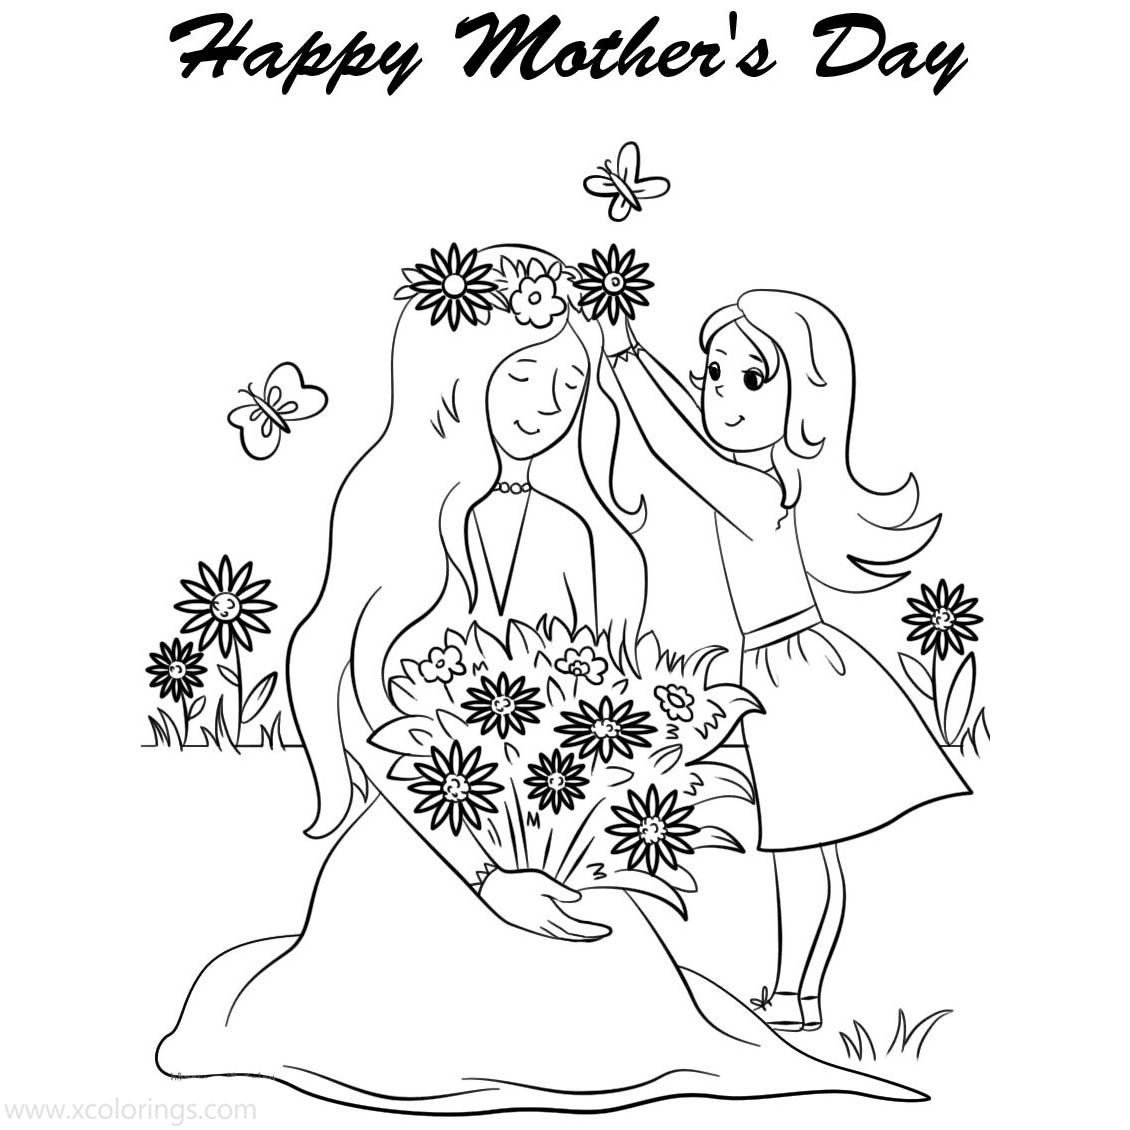 Free Mother's Day Coloring Pages for Daughter printable